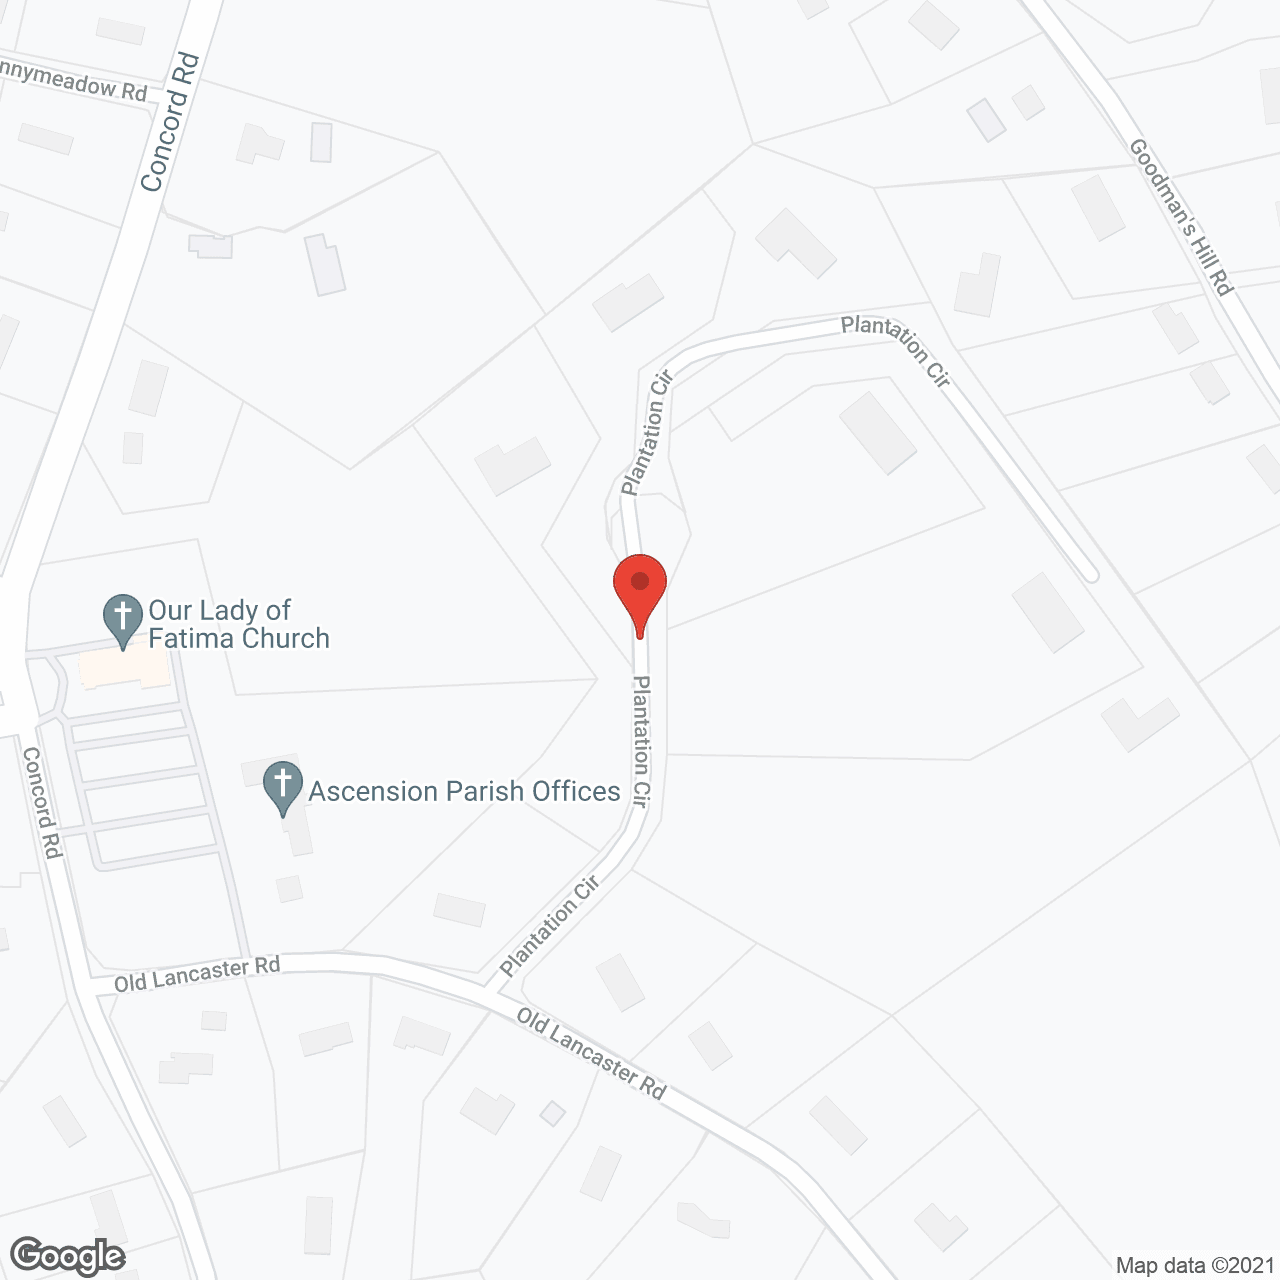 Notre Dame Long Term Care Ctr in google map